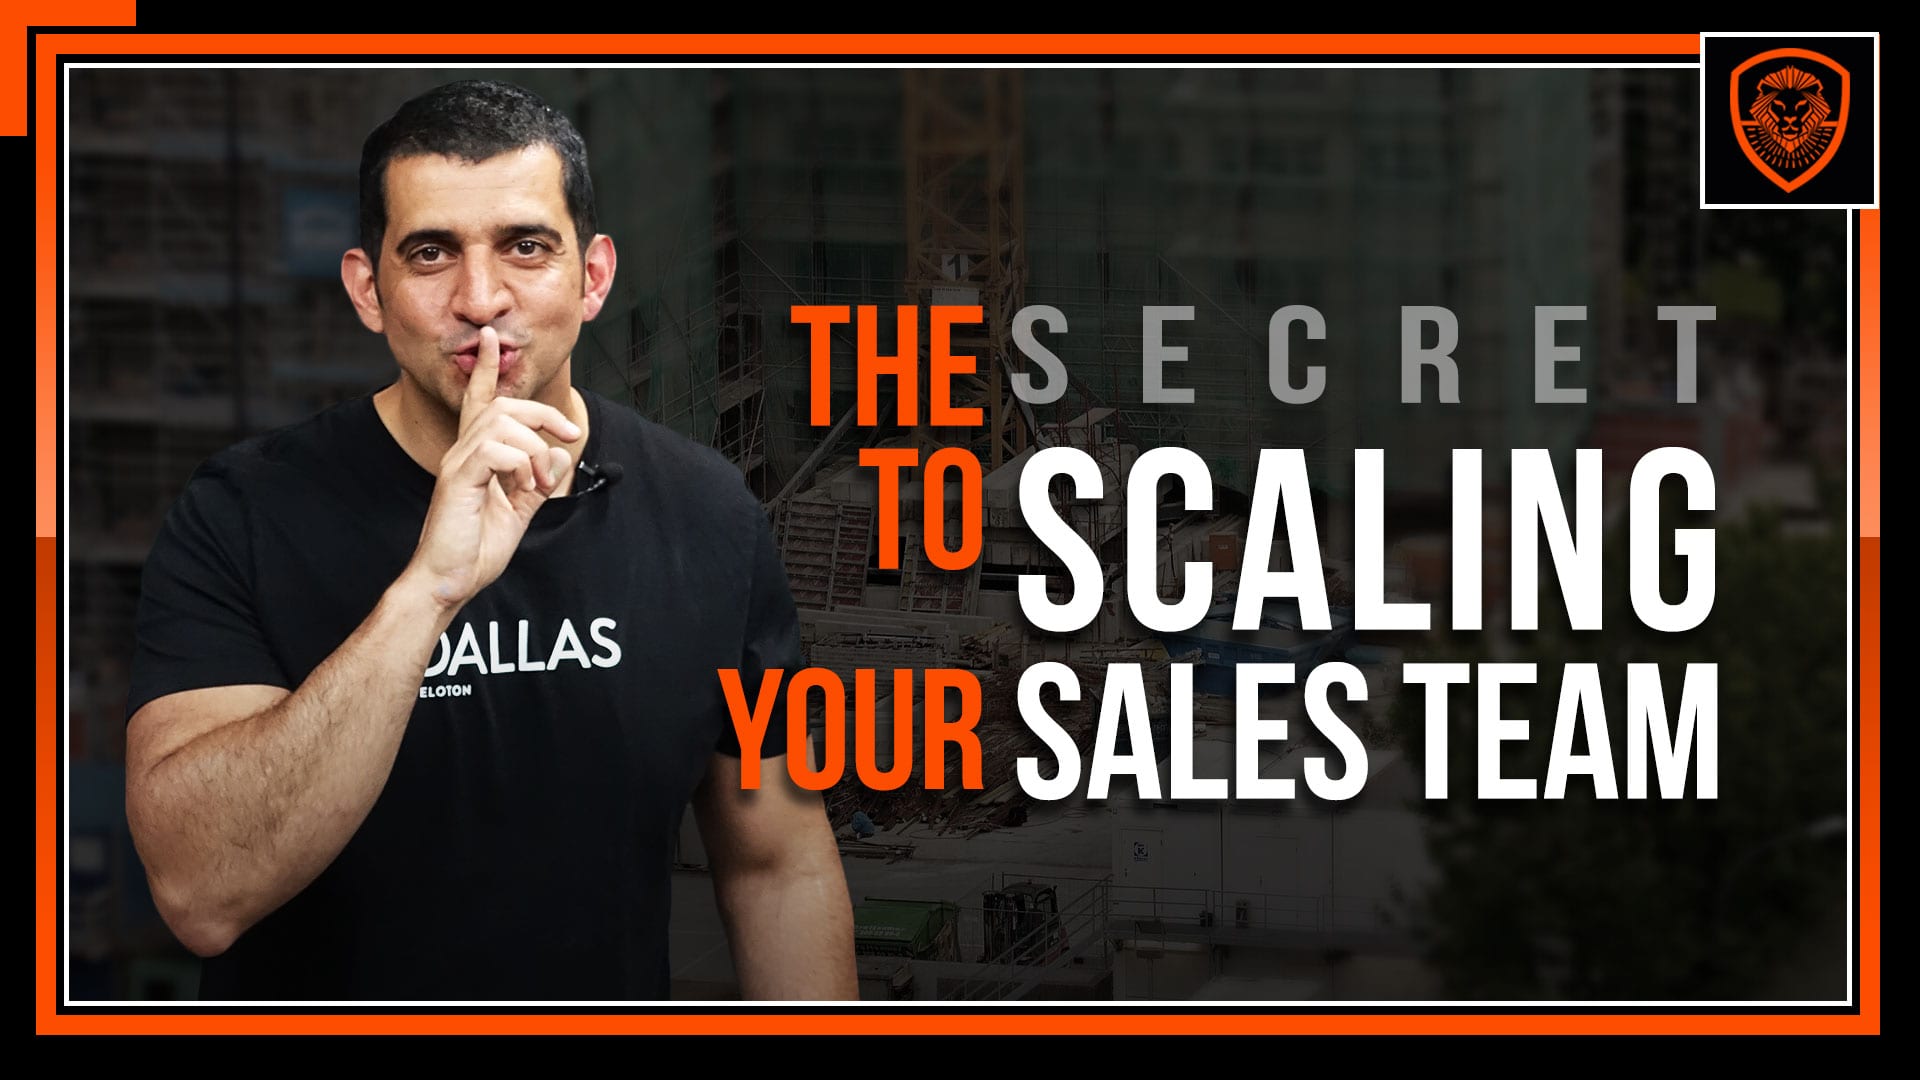 How to Get the Best Out of Your Sales Force